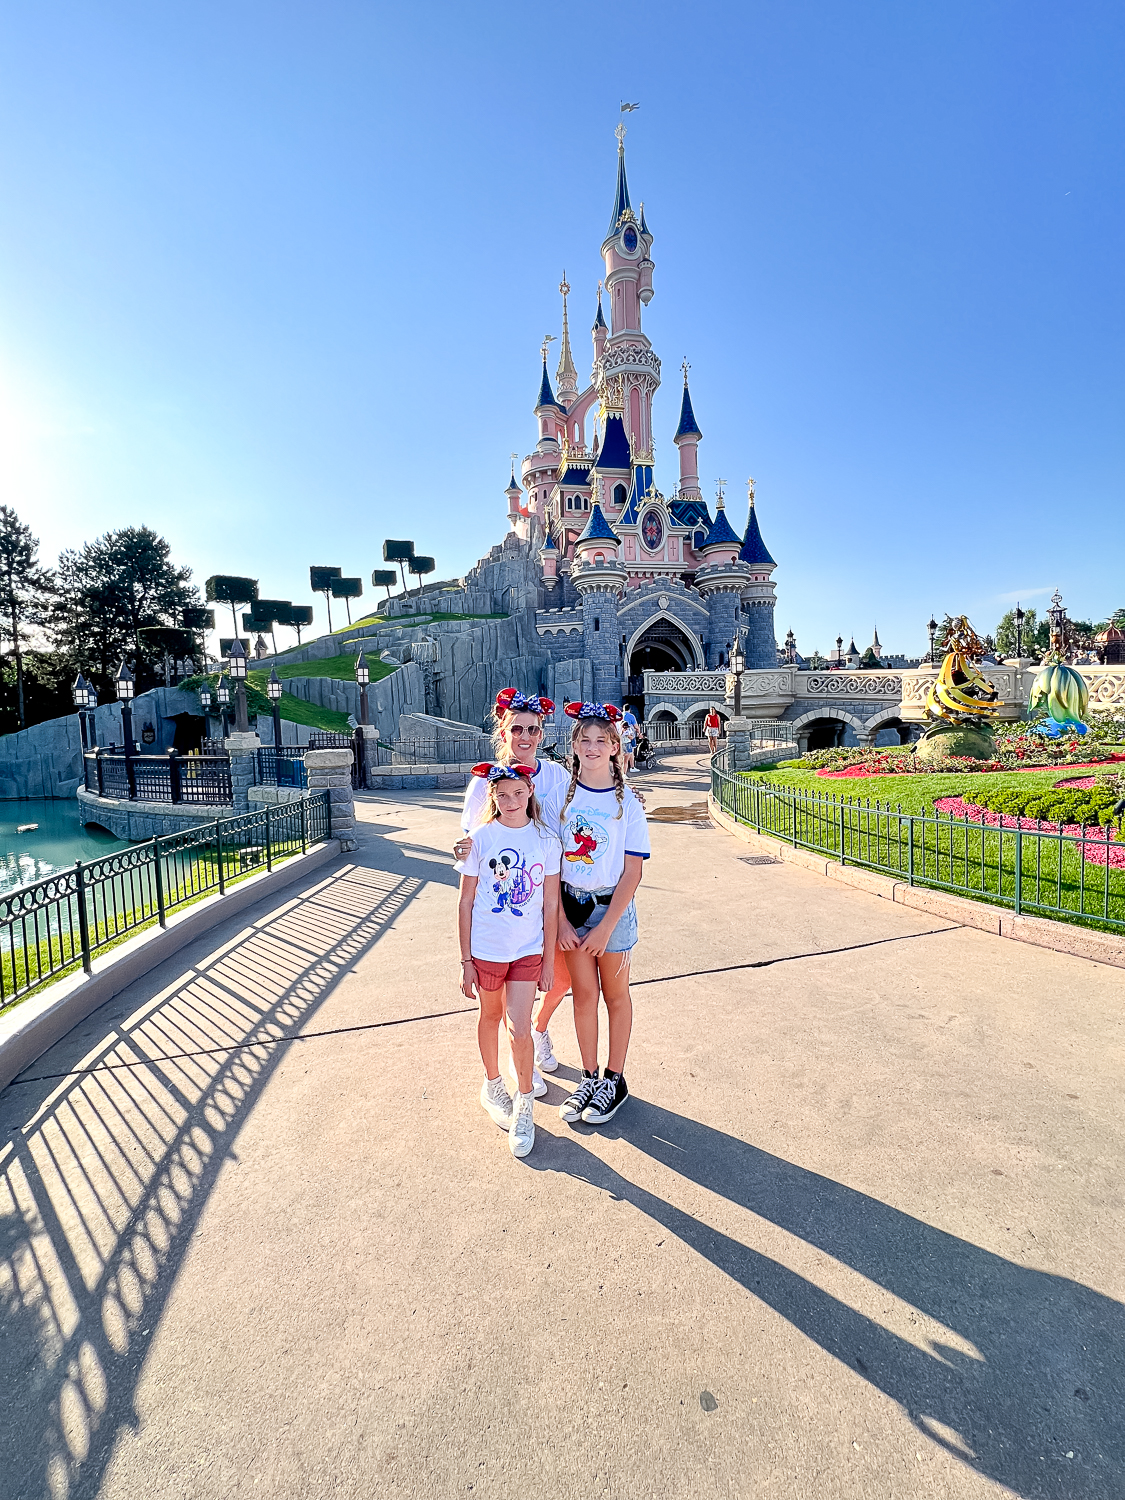 Pacific Globetrotters, budget family travel blog, shares 5 day itinerary in Paris with kids. Disneyland Paris